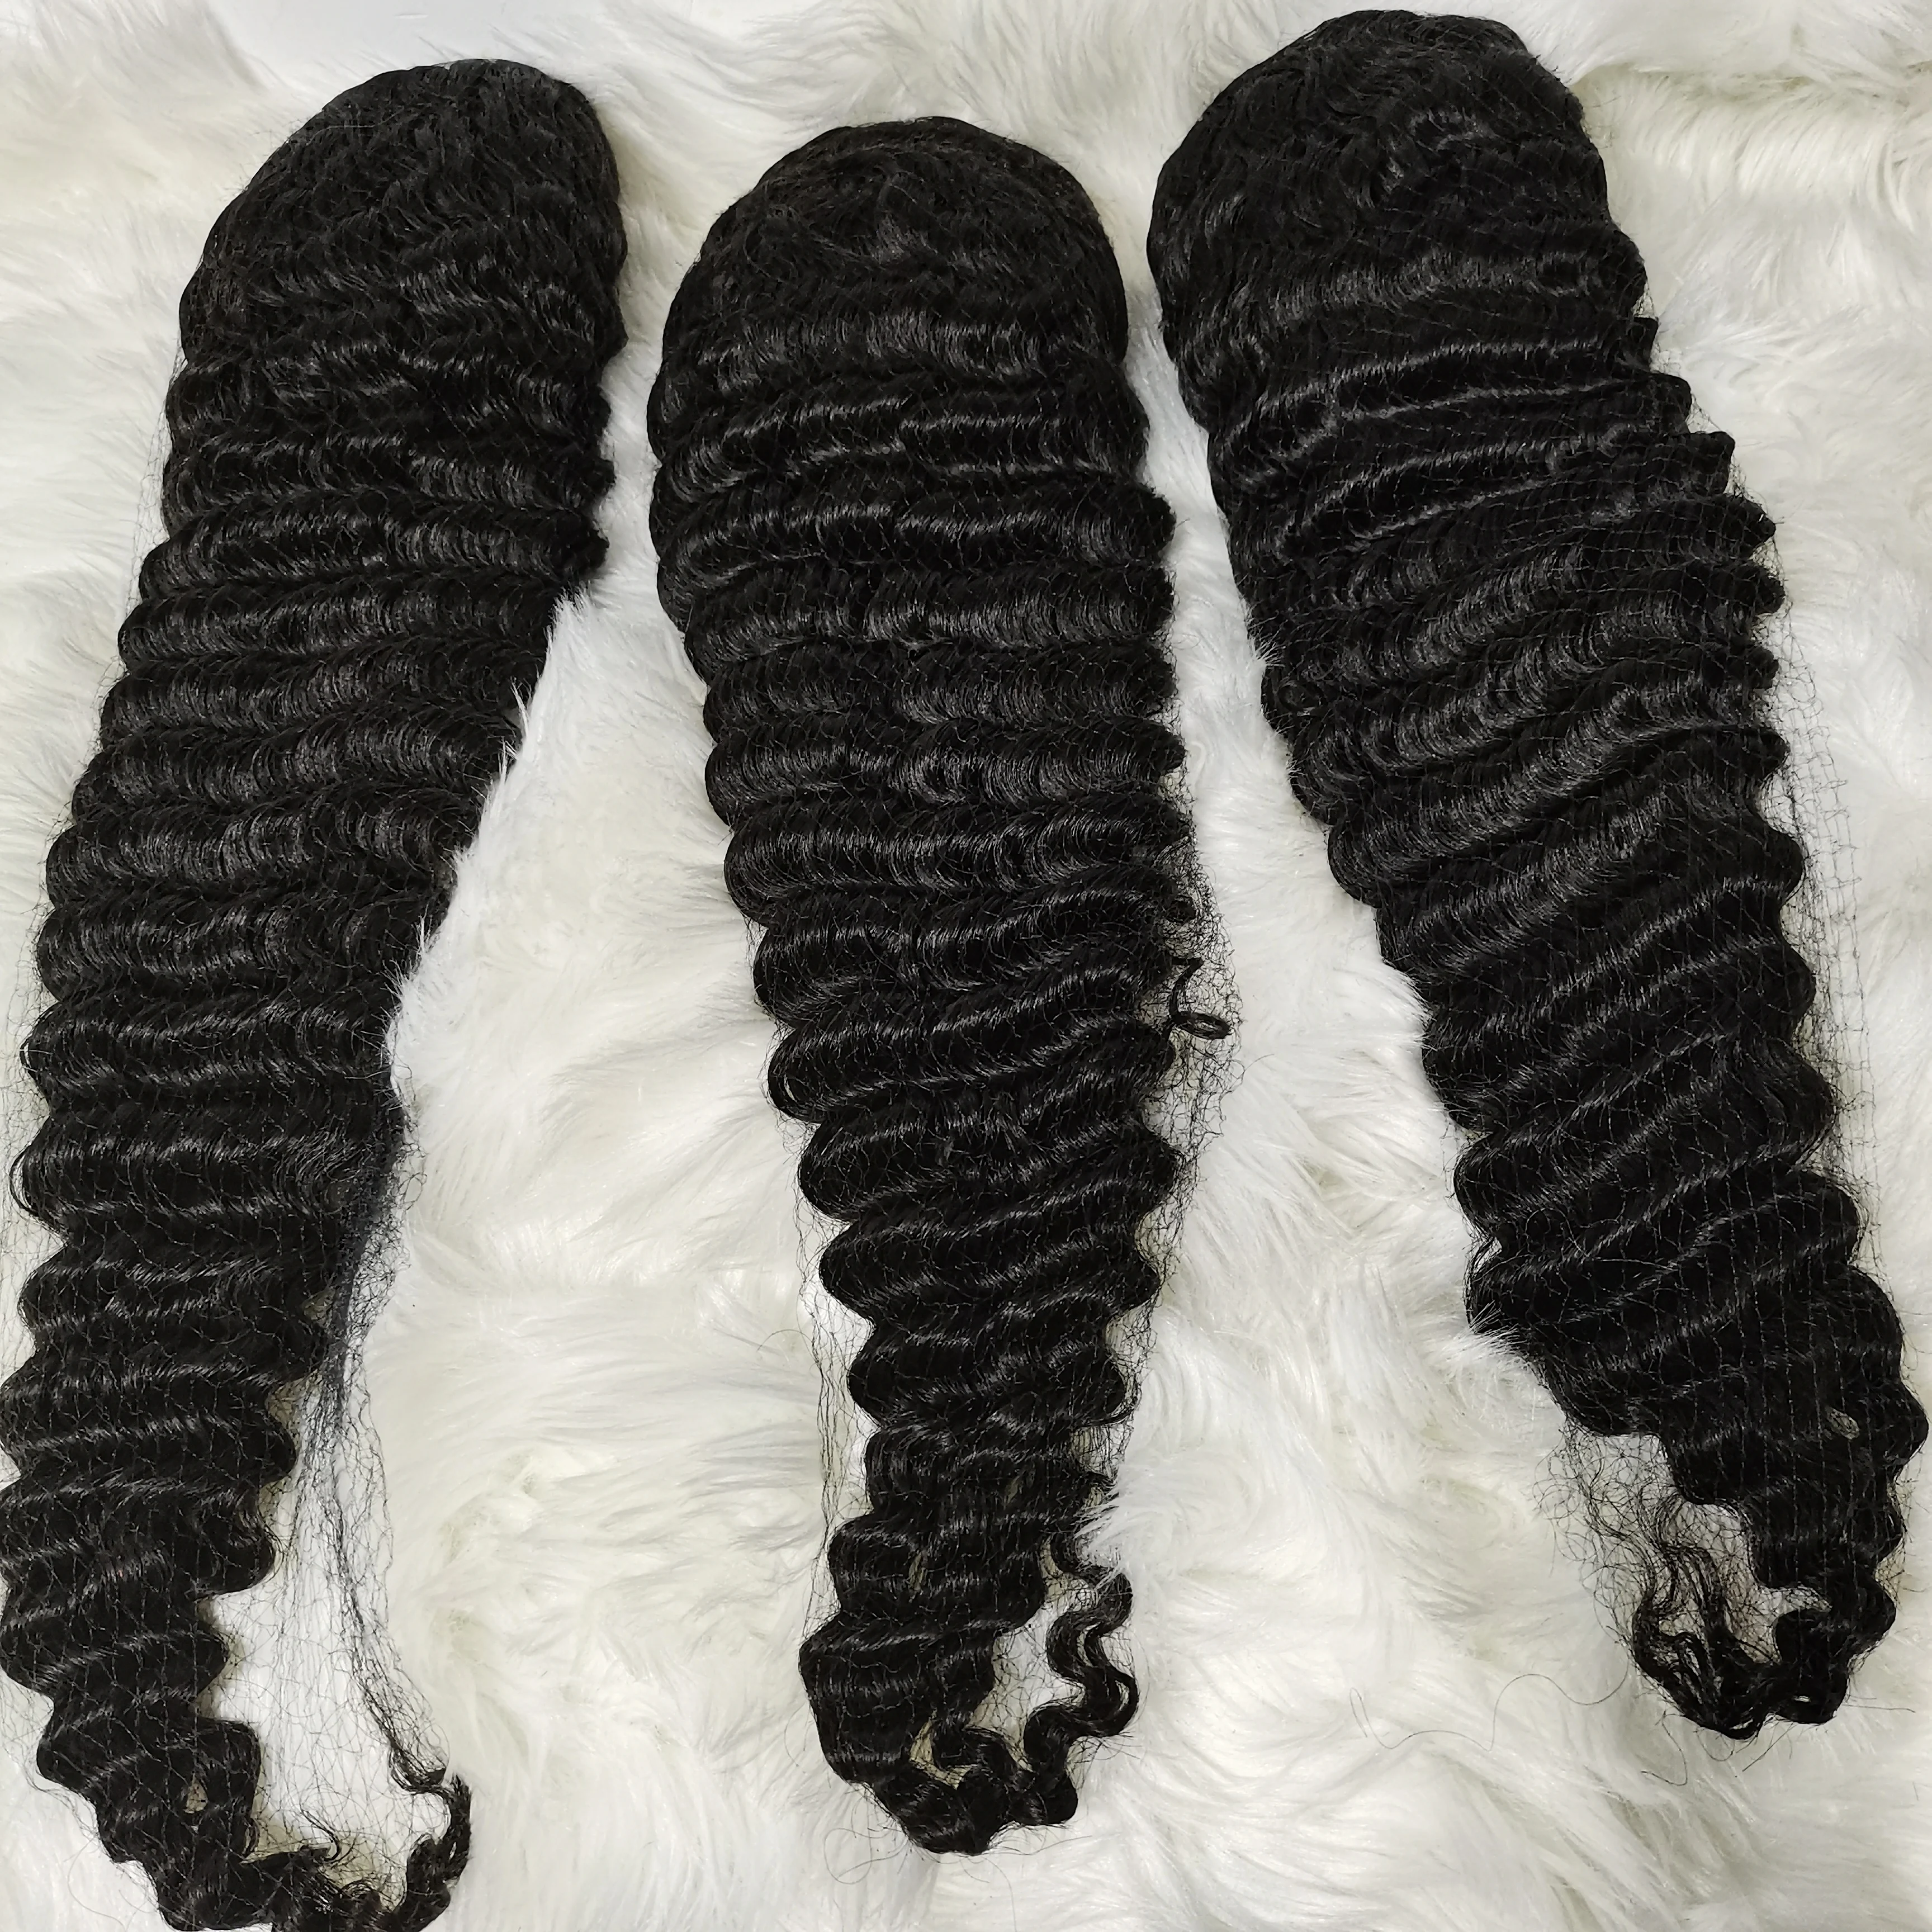 

Amara hd wig vendor best sale hd curly lace wigs top quality hd lace front wigs 13x6 in qingdao stock